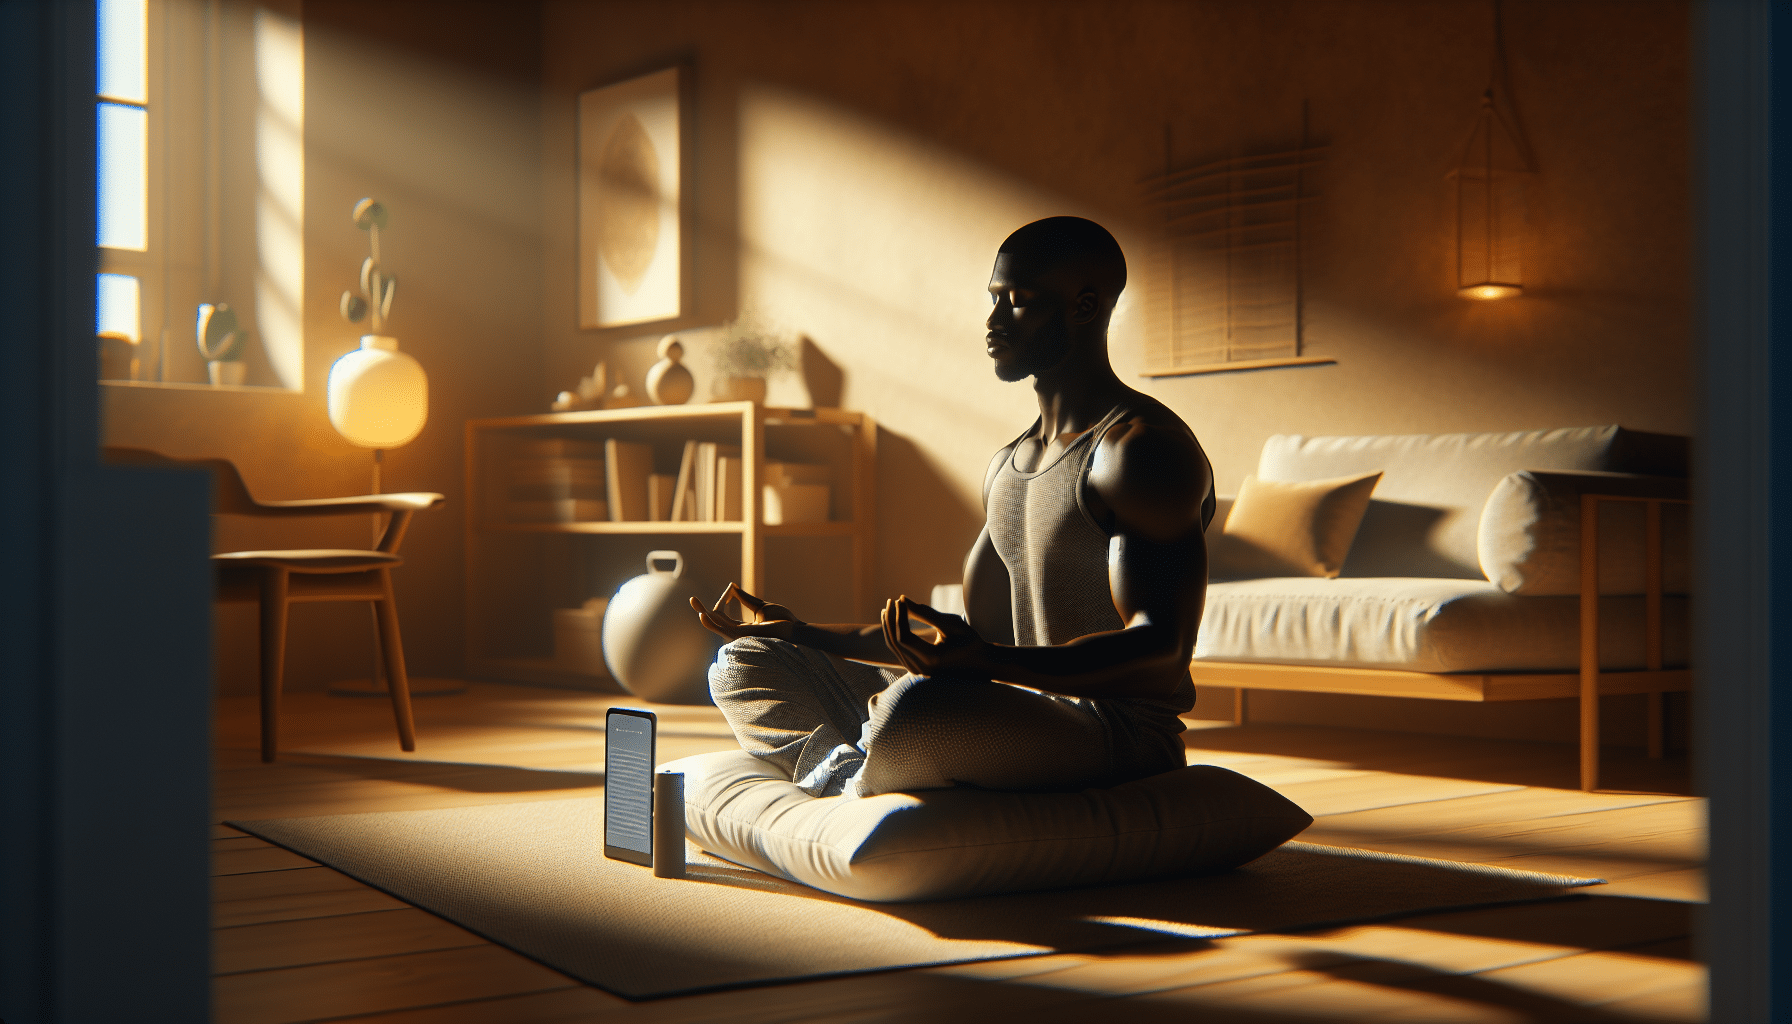 Person practicing guided meditation in tranquil home setting.